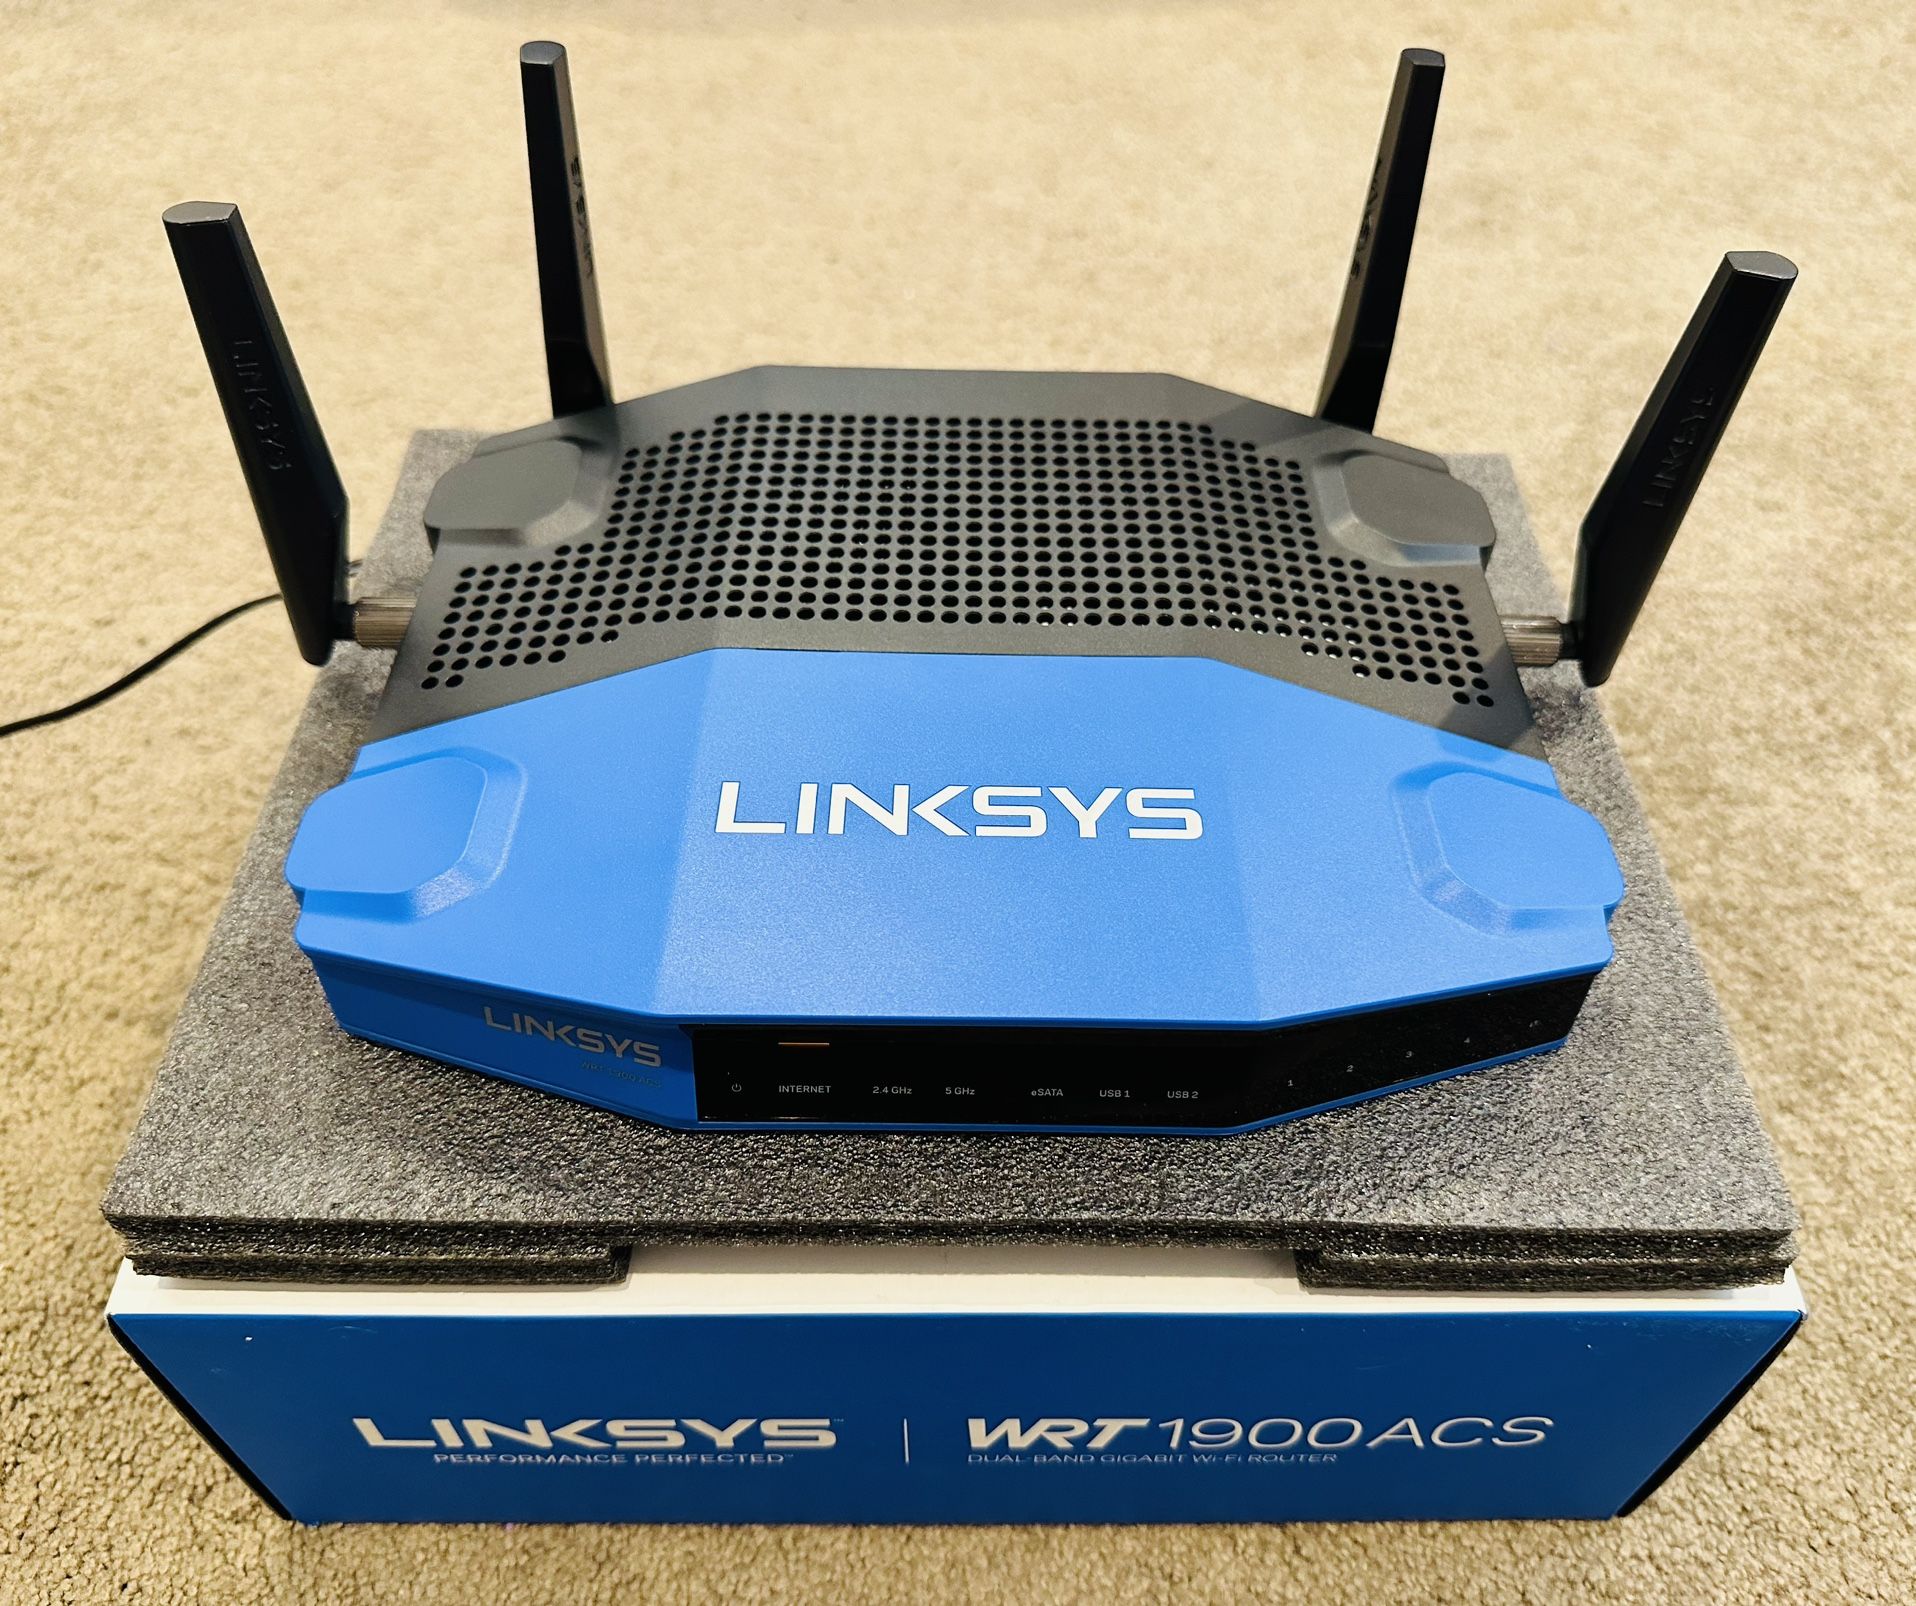 Linksys Dual-Band Gigabit WiFi Wireless Router, Speeds up to (AC1900) 1.9Gbps - WRT1900ACS